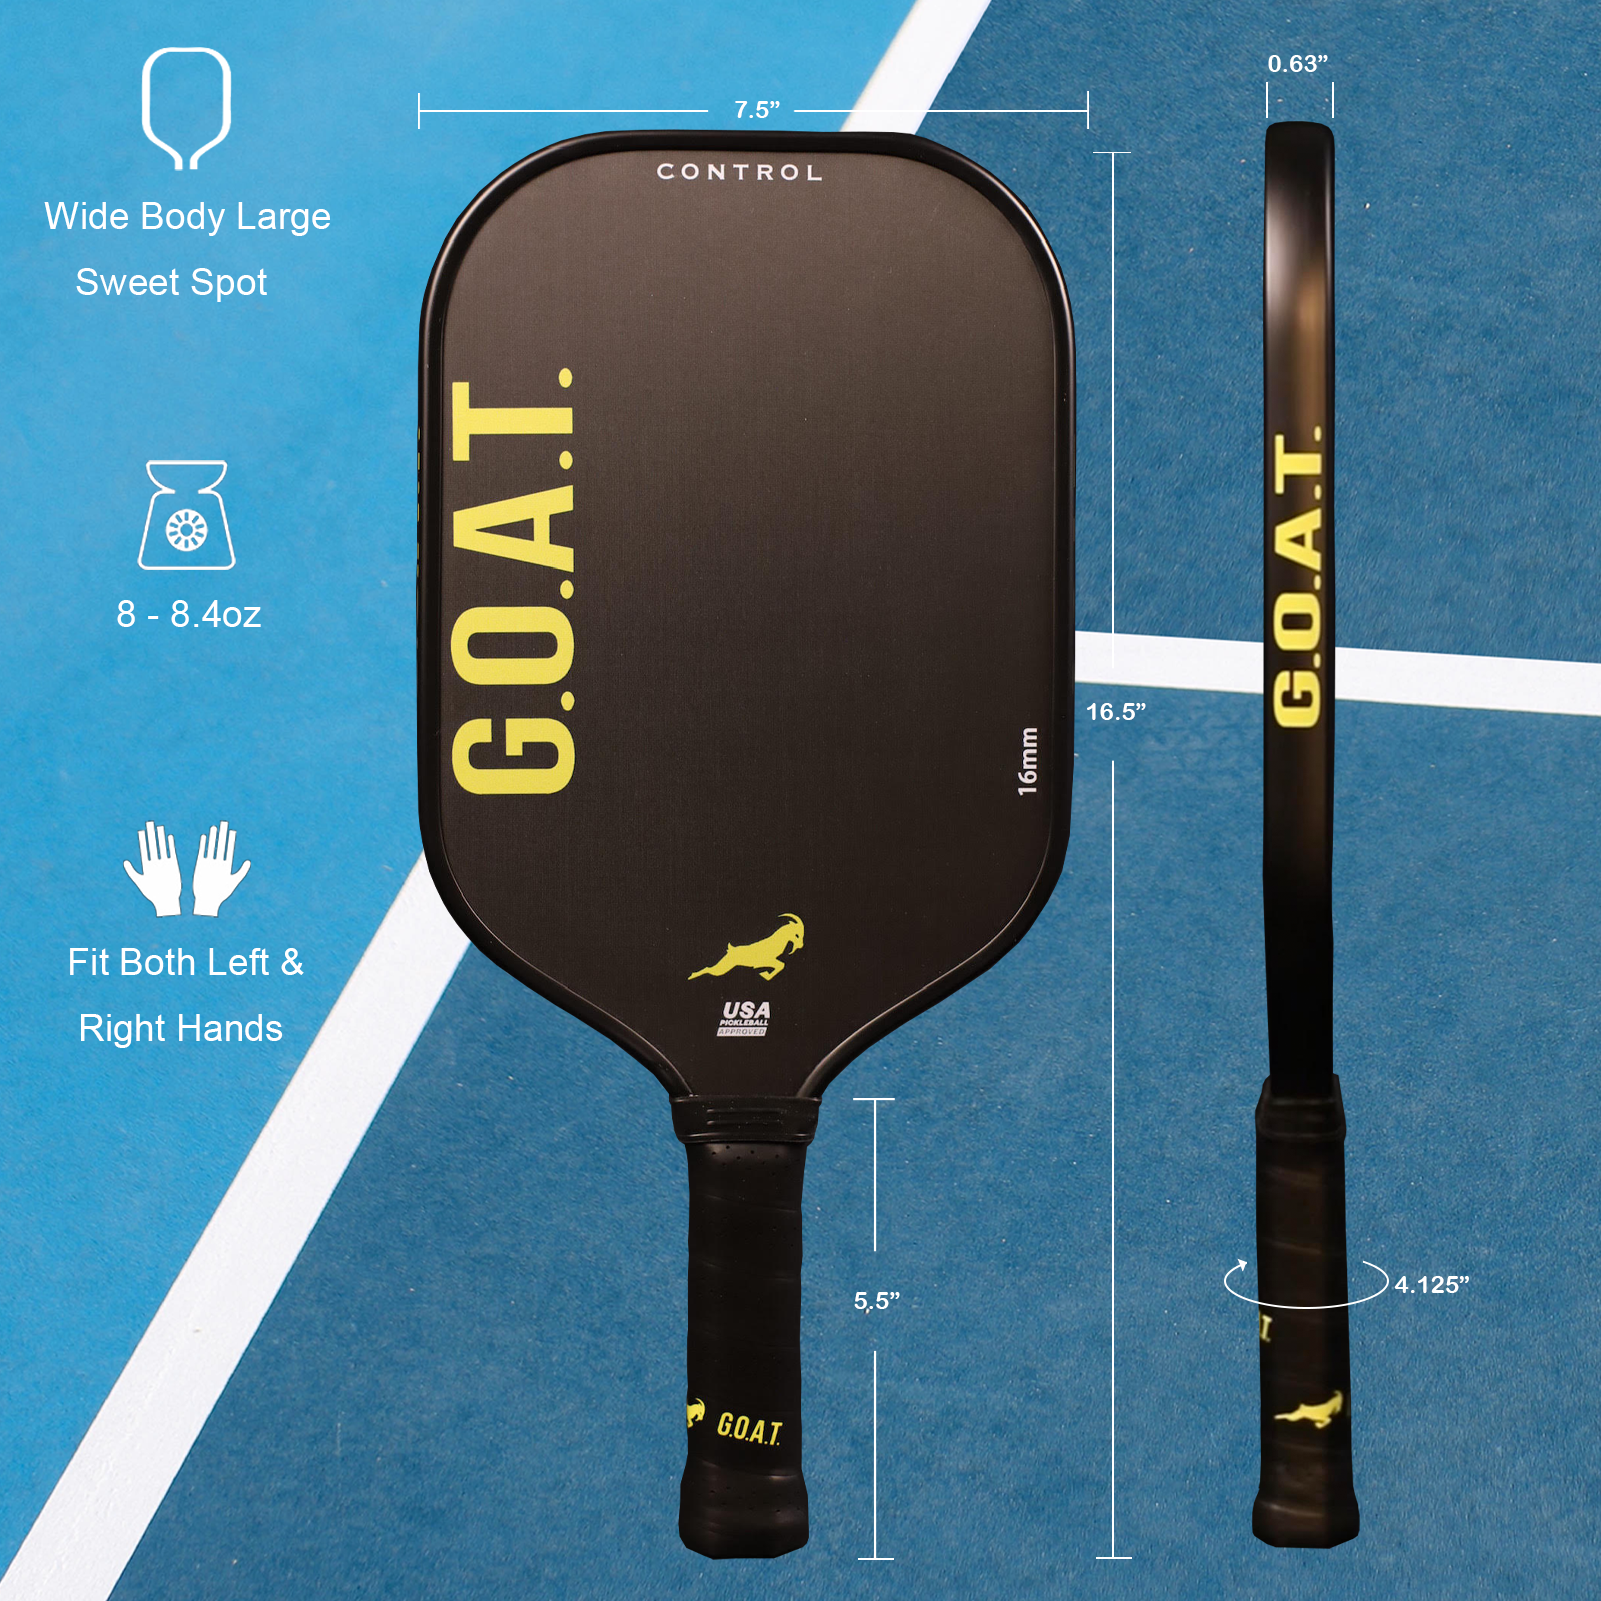 GOAT best control paddle: white handle, black face with goat head, gray back. Highlights large sweet spot, for powerful play. Fits both left and right hands.